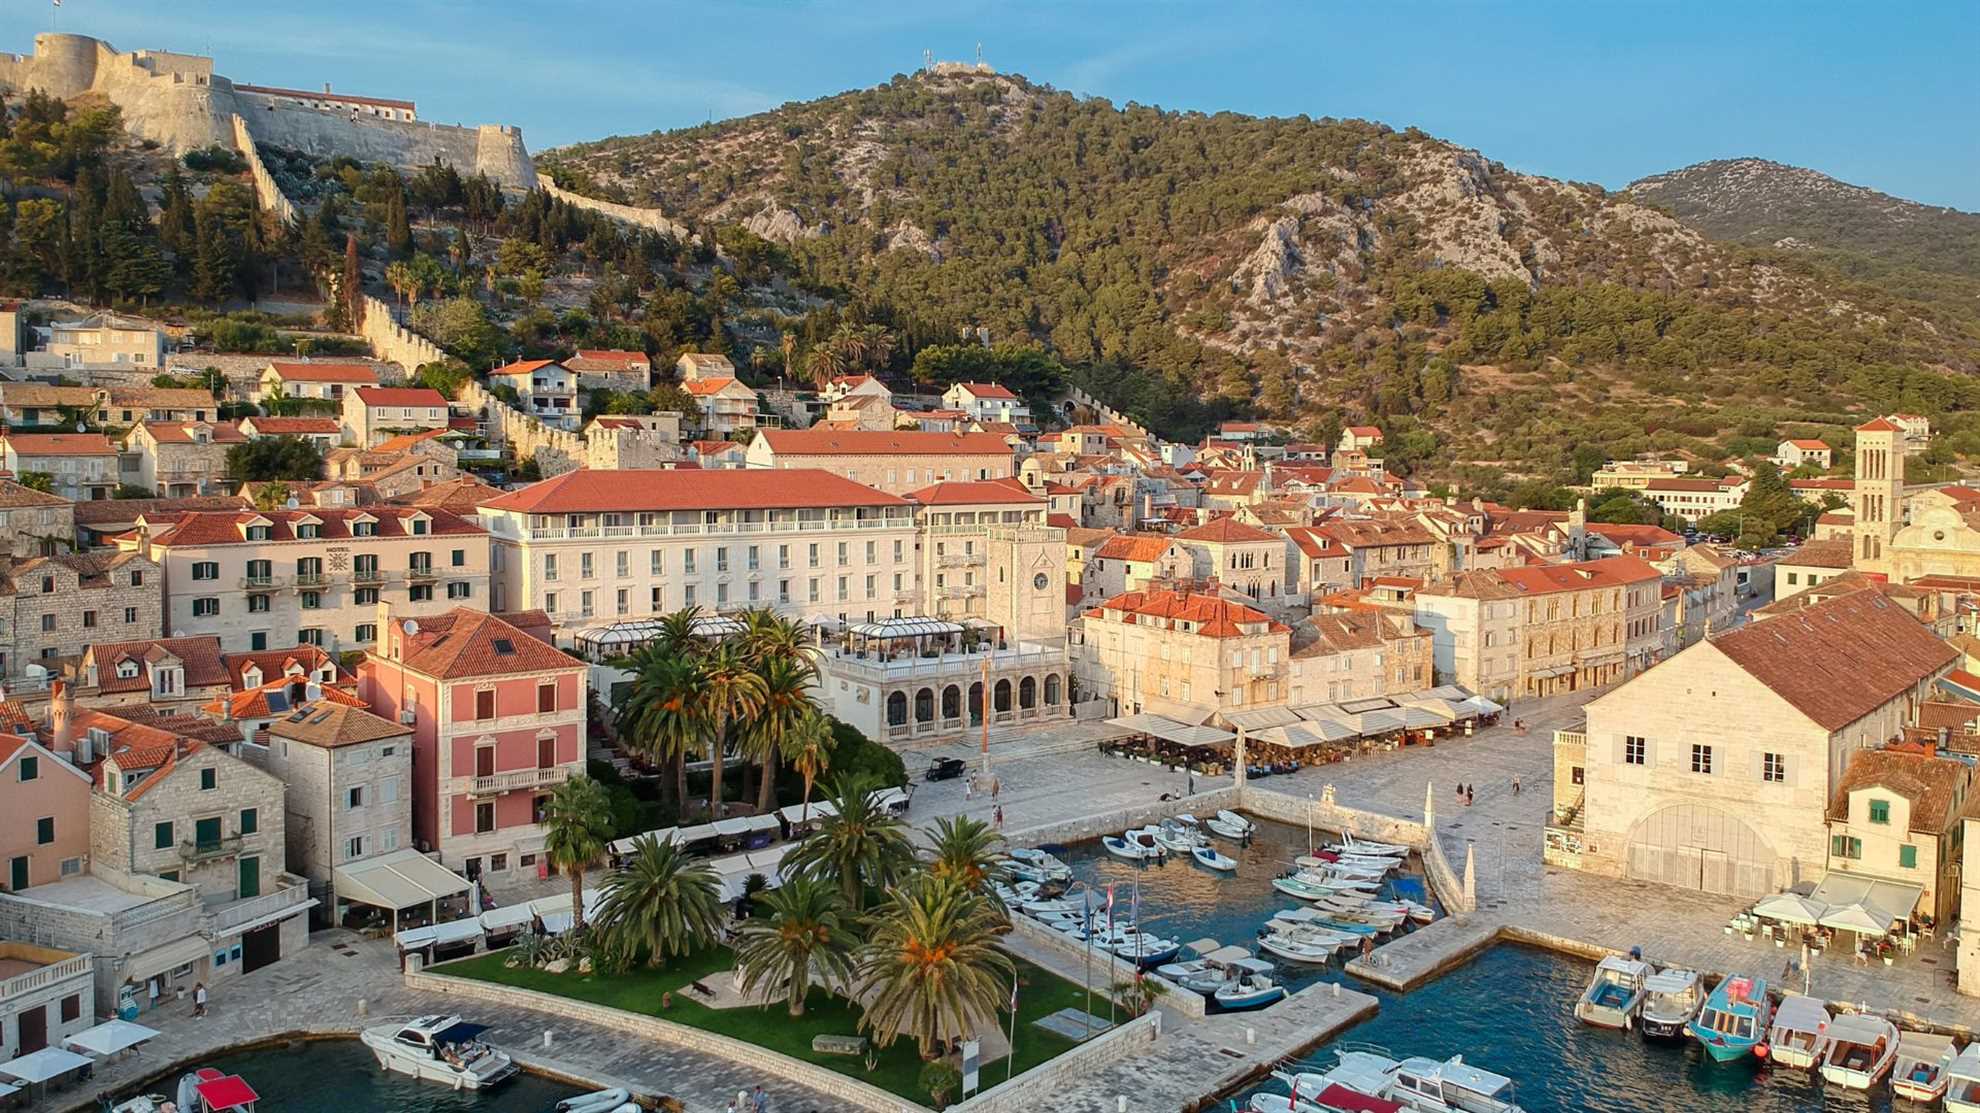 Our favorite things to do in Hvar town